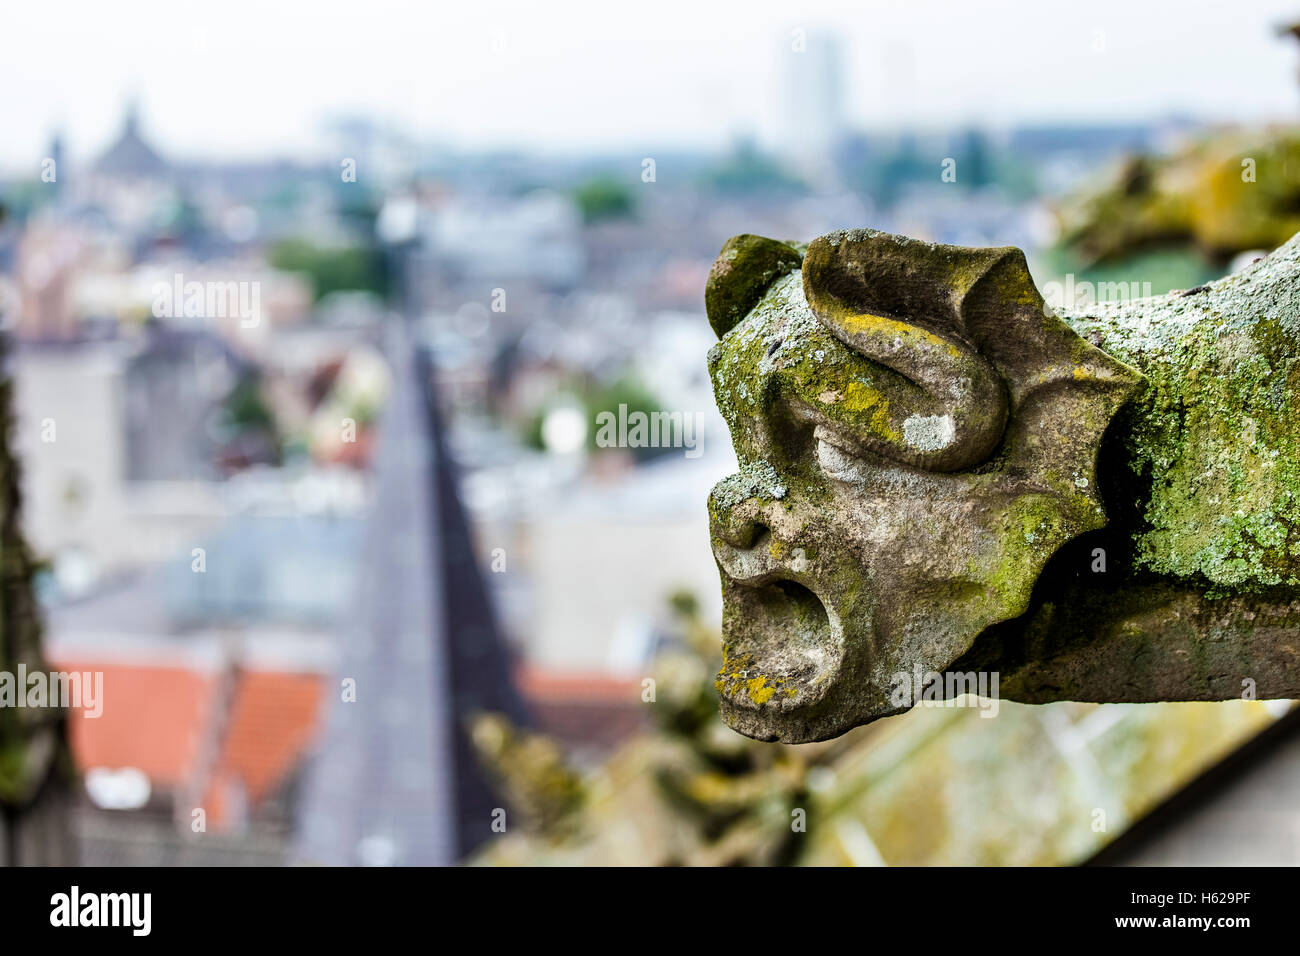 Gargoyle on St. Jan's cathedral overlooking the city of Den Bosch, Netherlands. Stock Photo